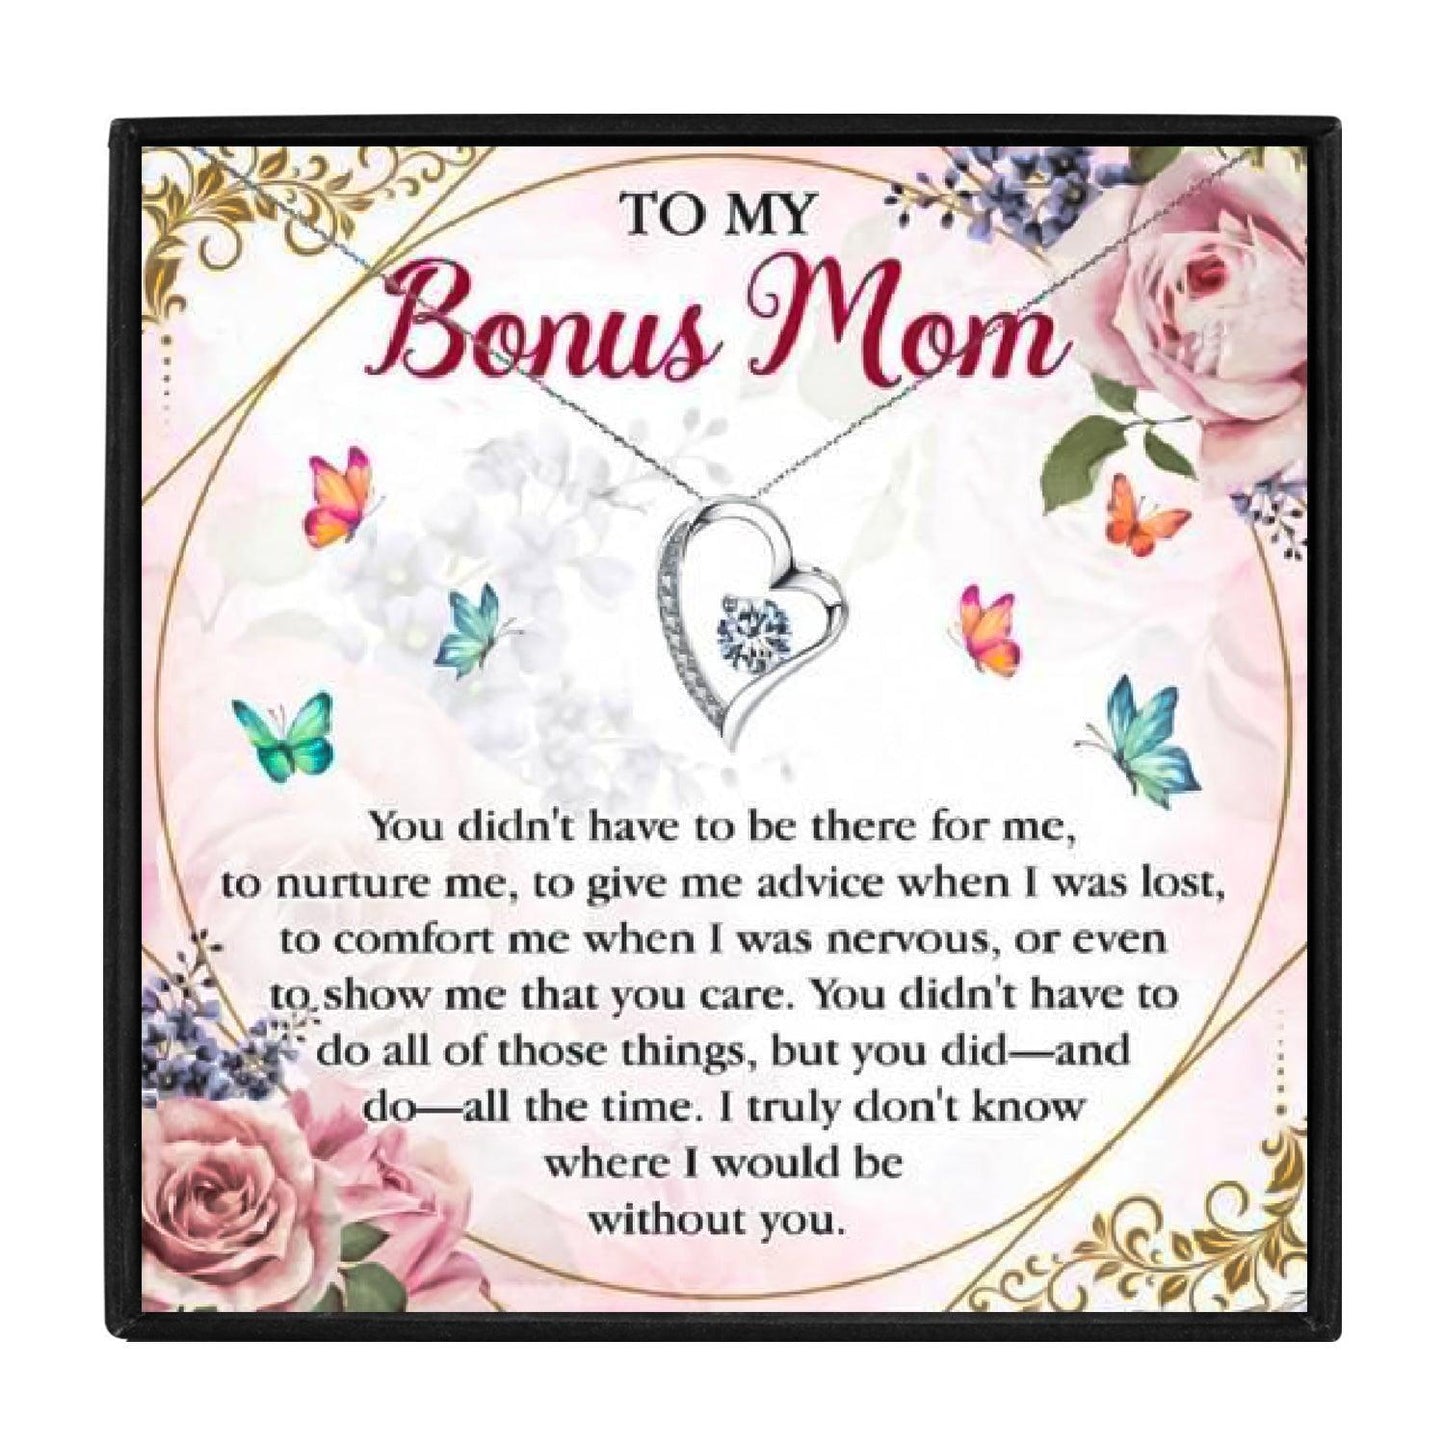 Gifts for Bonus Mom Necklace for Christmas 2023 | Gifts for Bonus Mom Necklace - undefined | Bonus Mom Necklace, Bonus Mom Necklace Family Gifts, Bonus Mom Necklace Gift, Gifts for Bonus Mom, Gifts for Bonus Mom Necklace | From Hunny Life | hunnylife.com